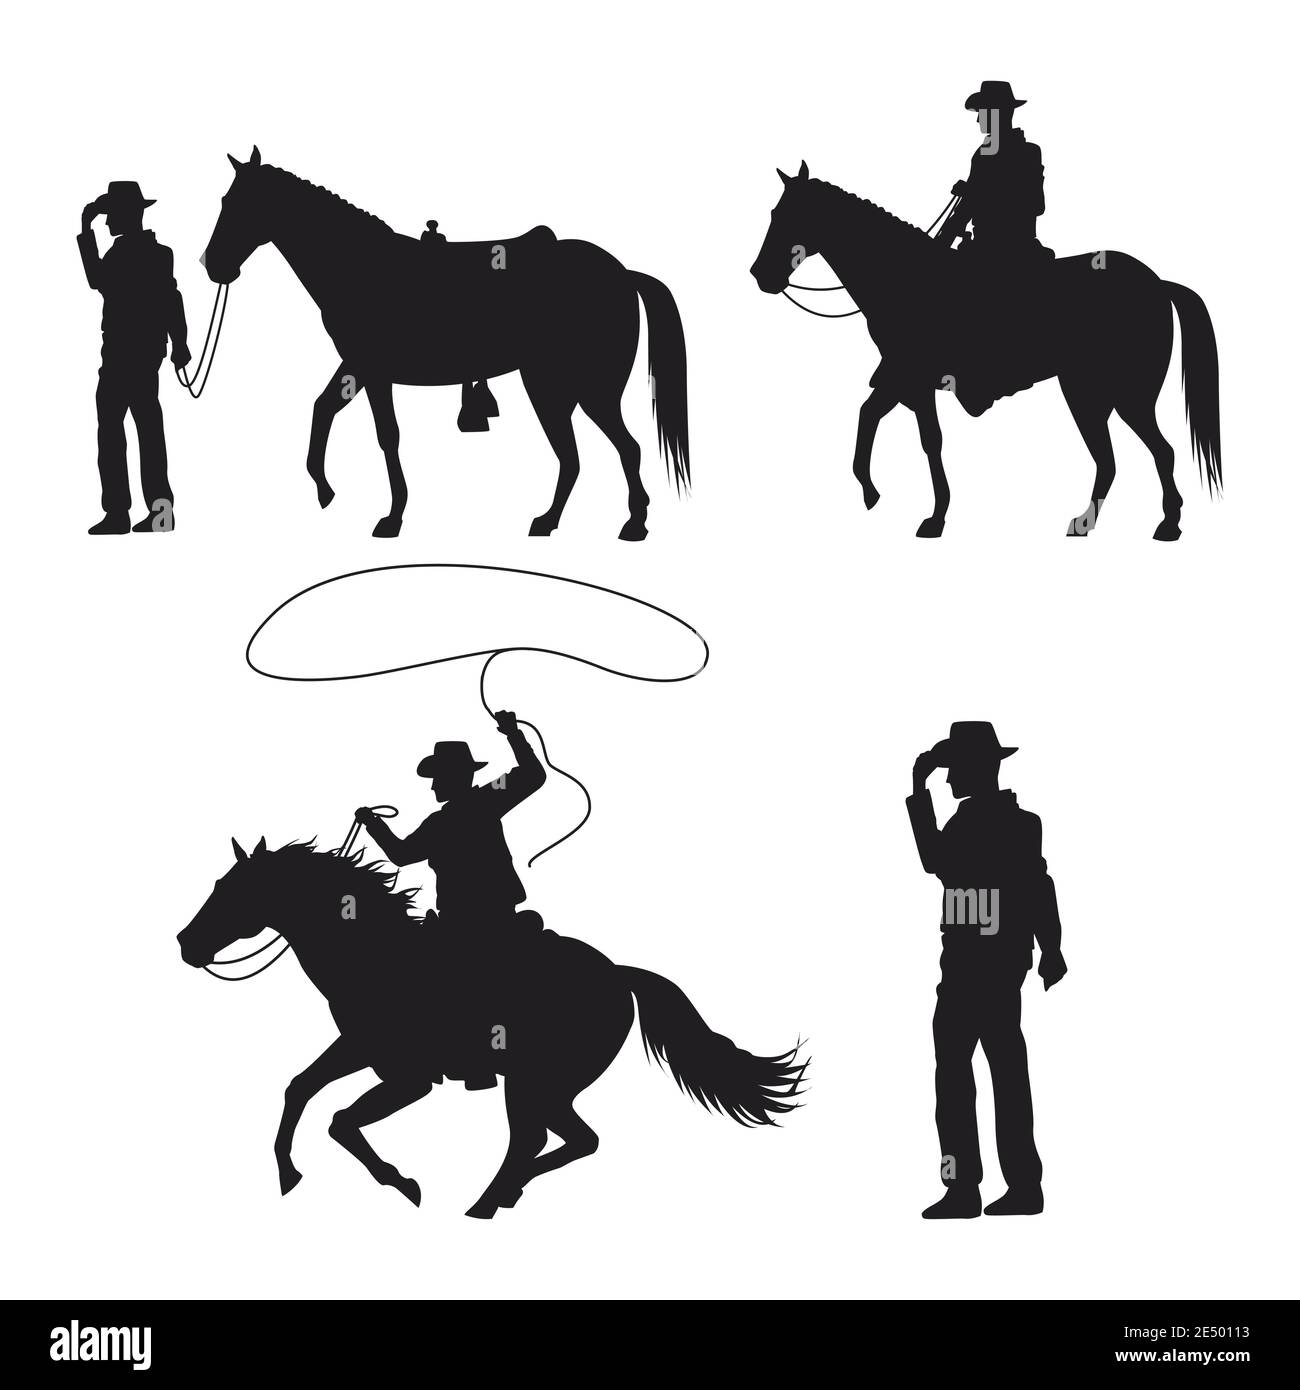 cowboys silhouettes with guns and horses vector illustration design ...